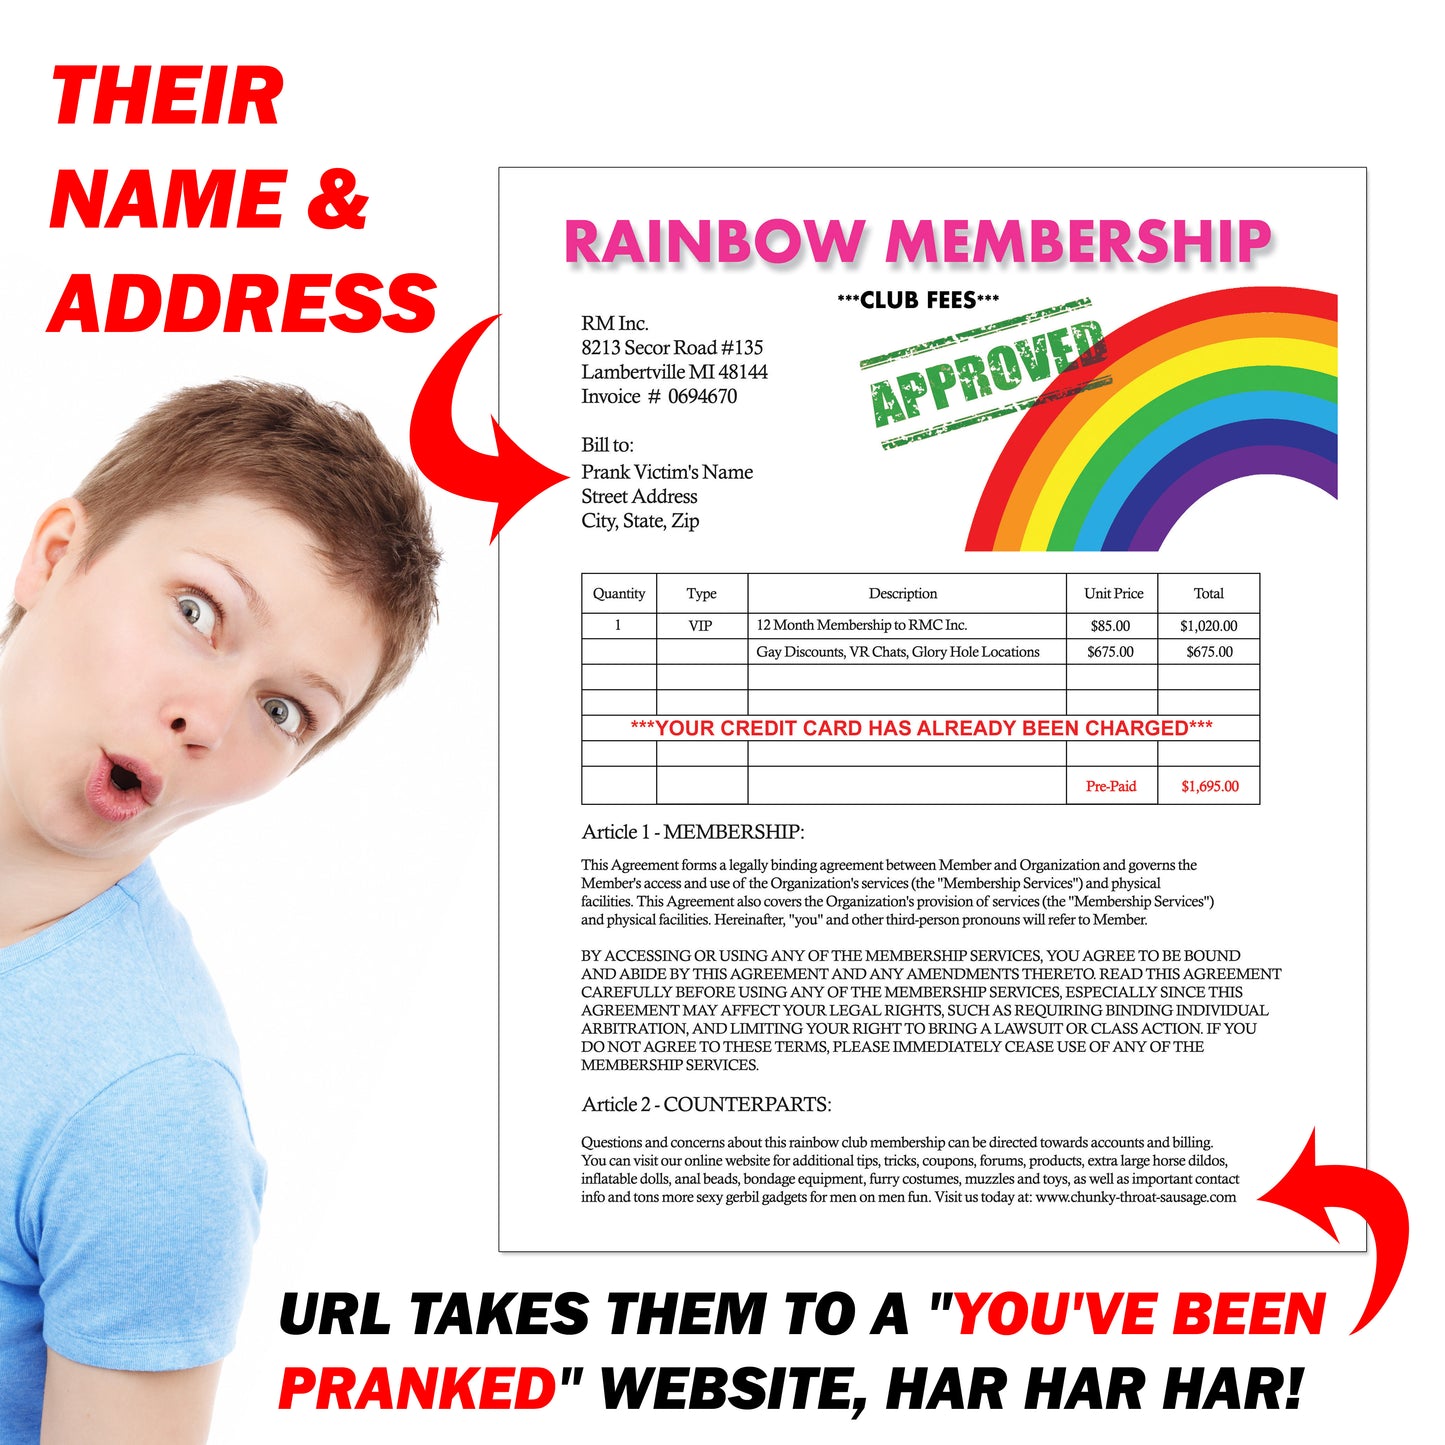 Coming Out Of The Closet Mail Prank Letter